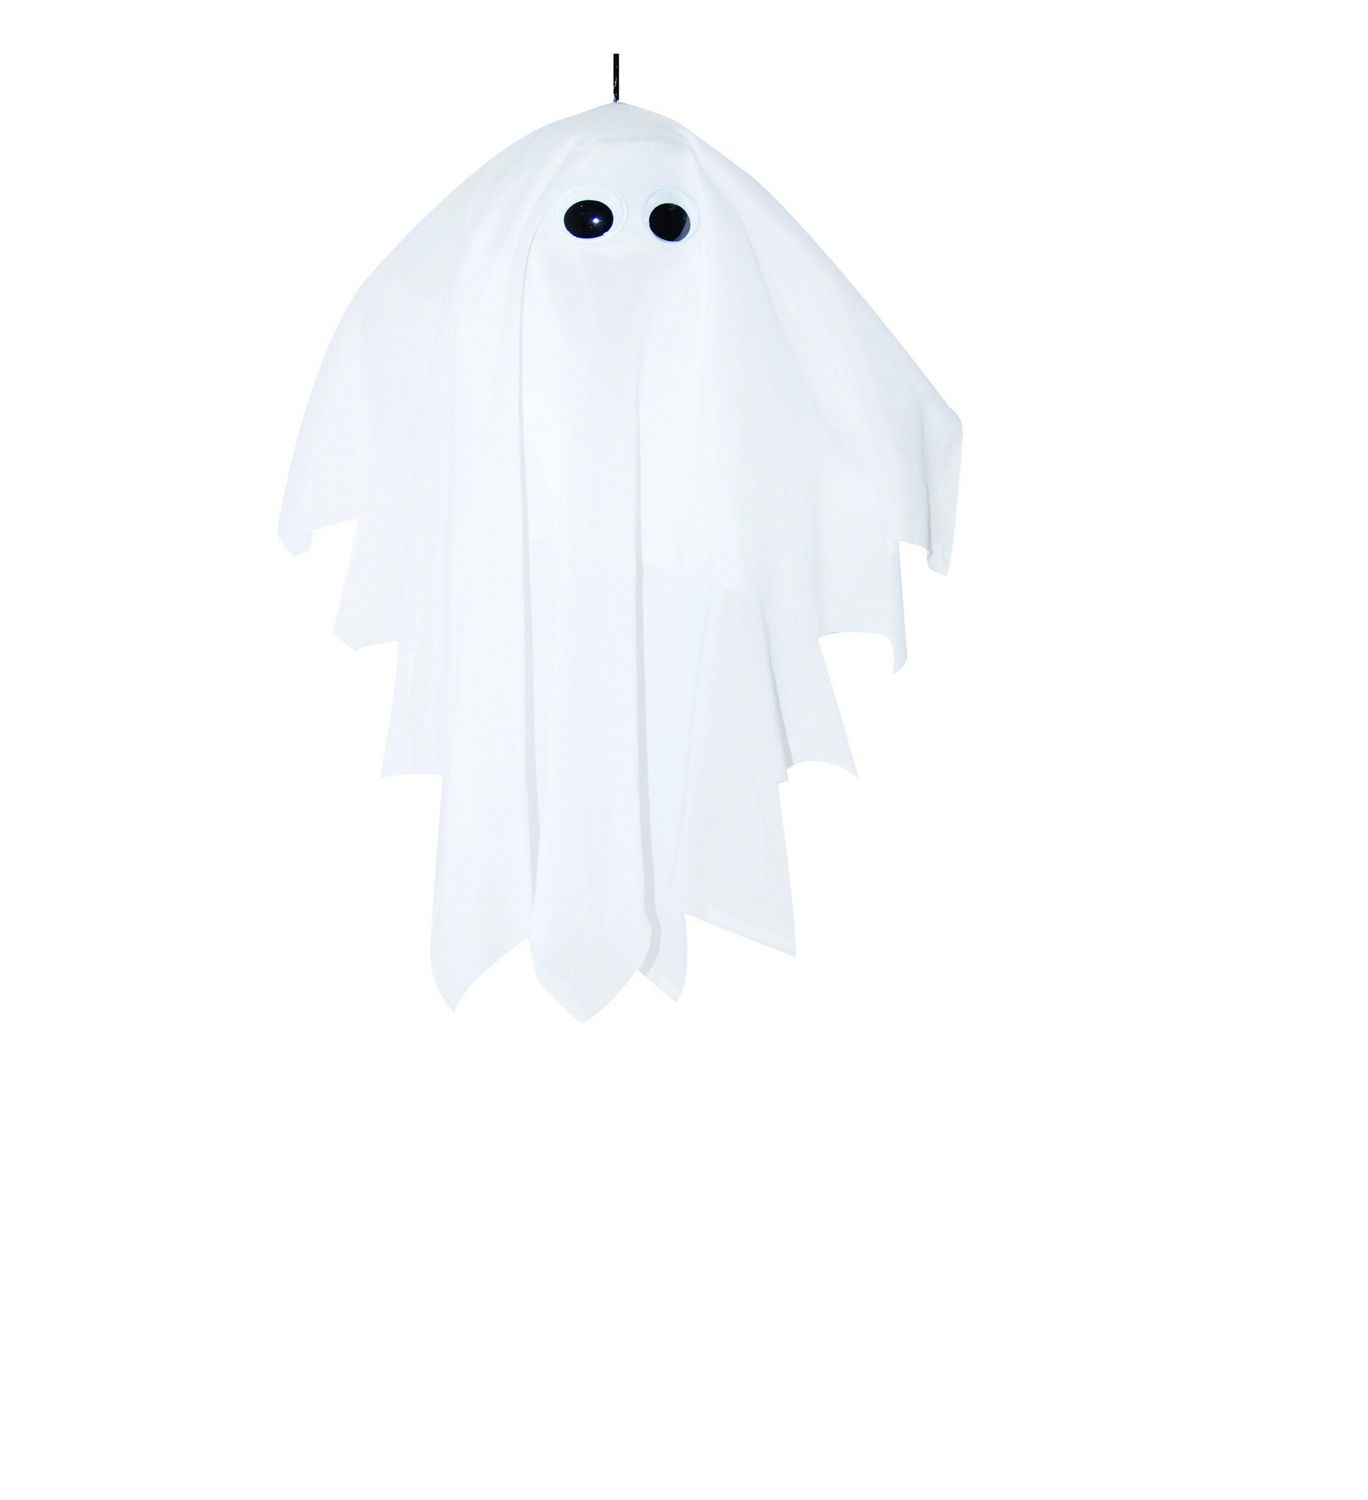 Way to Celebrate Halloween Hanging Animated Outdoor Decor, 20